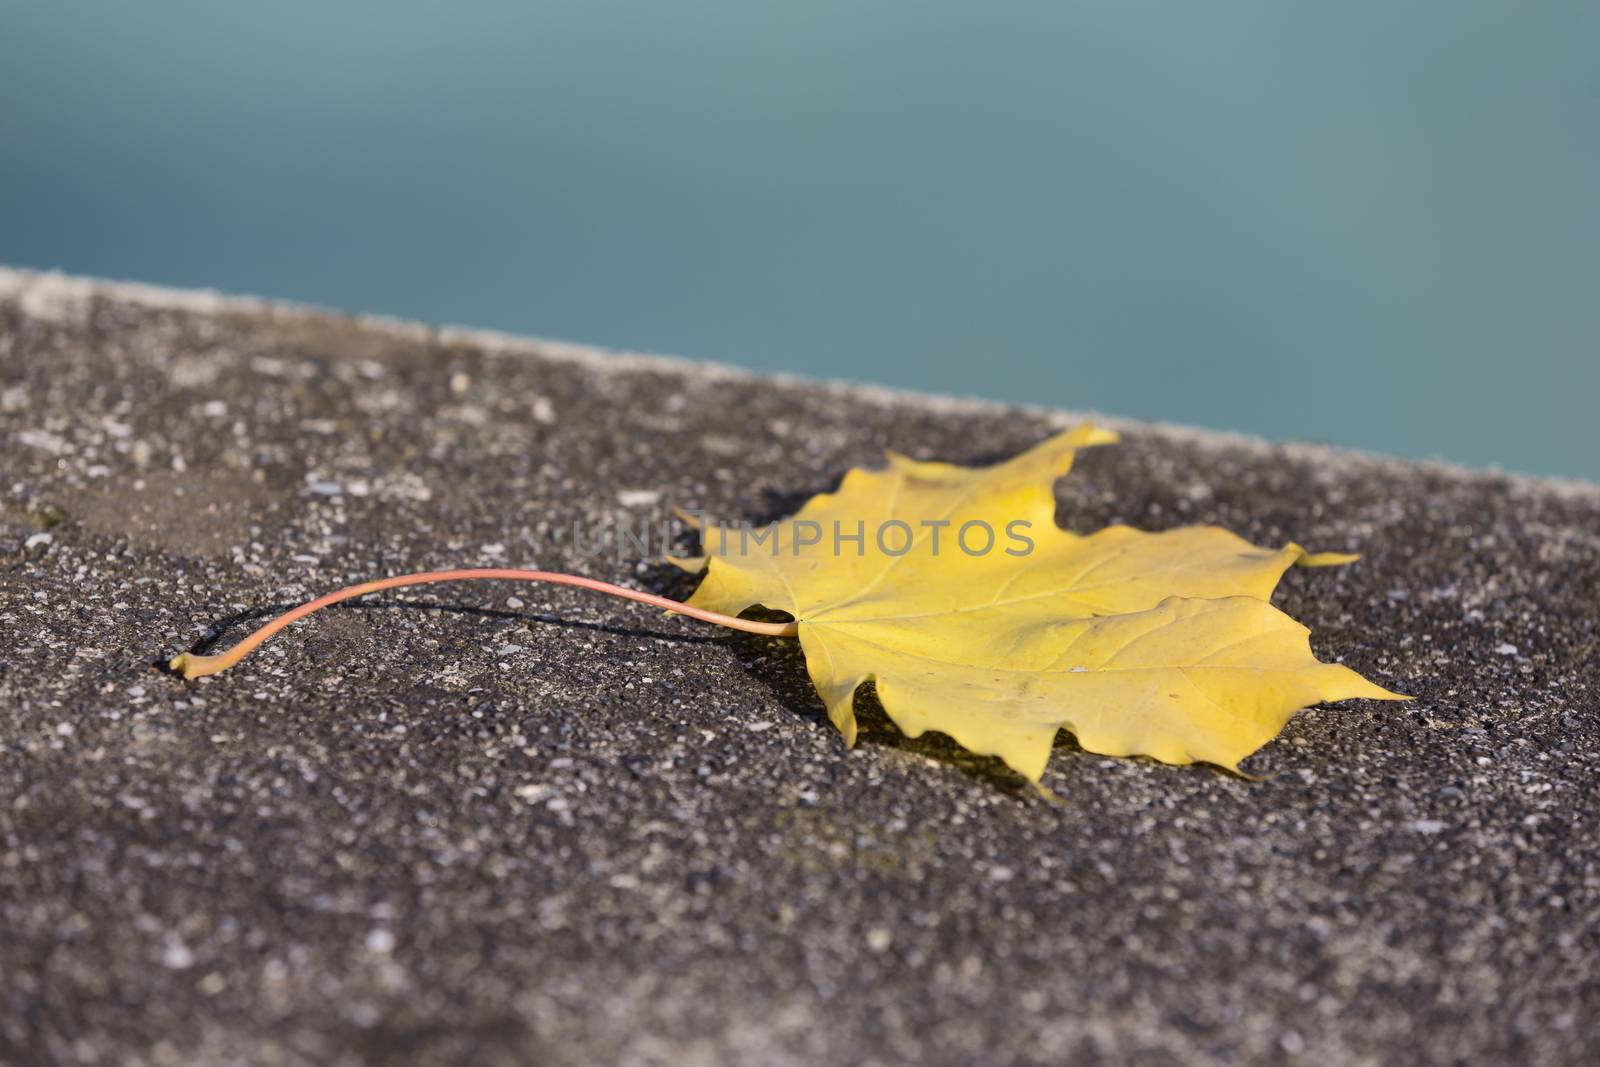 A single golden leaf laying on concrete by the riverside with the blue water in the background.